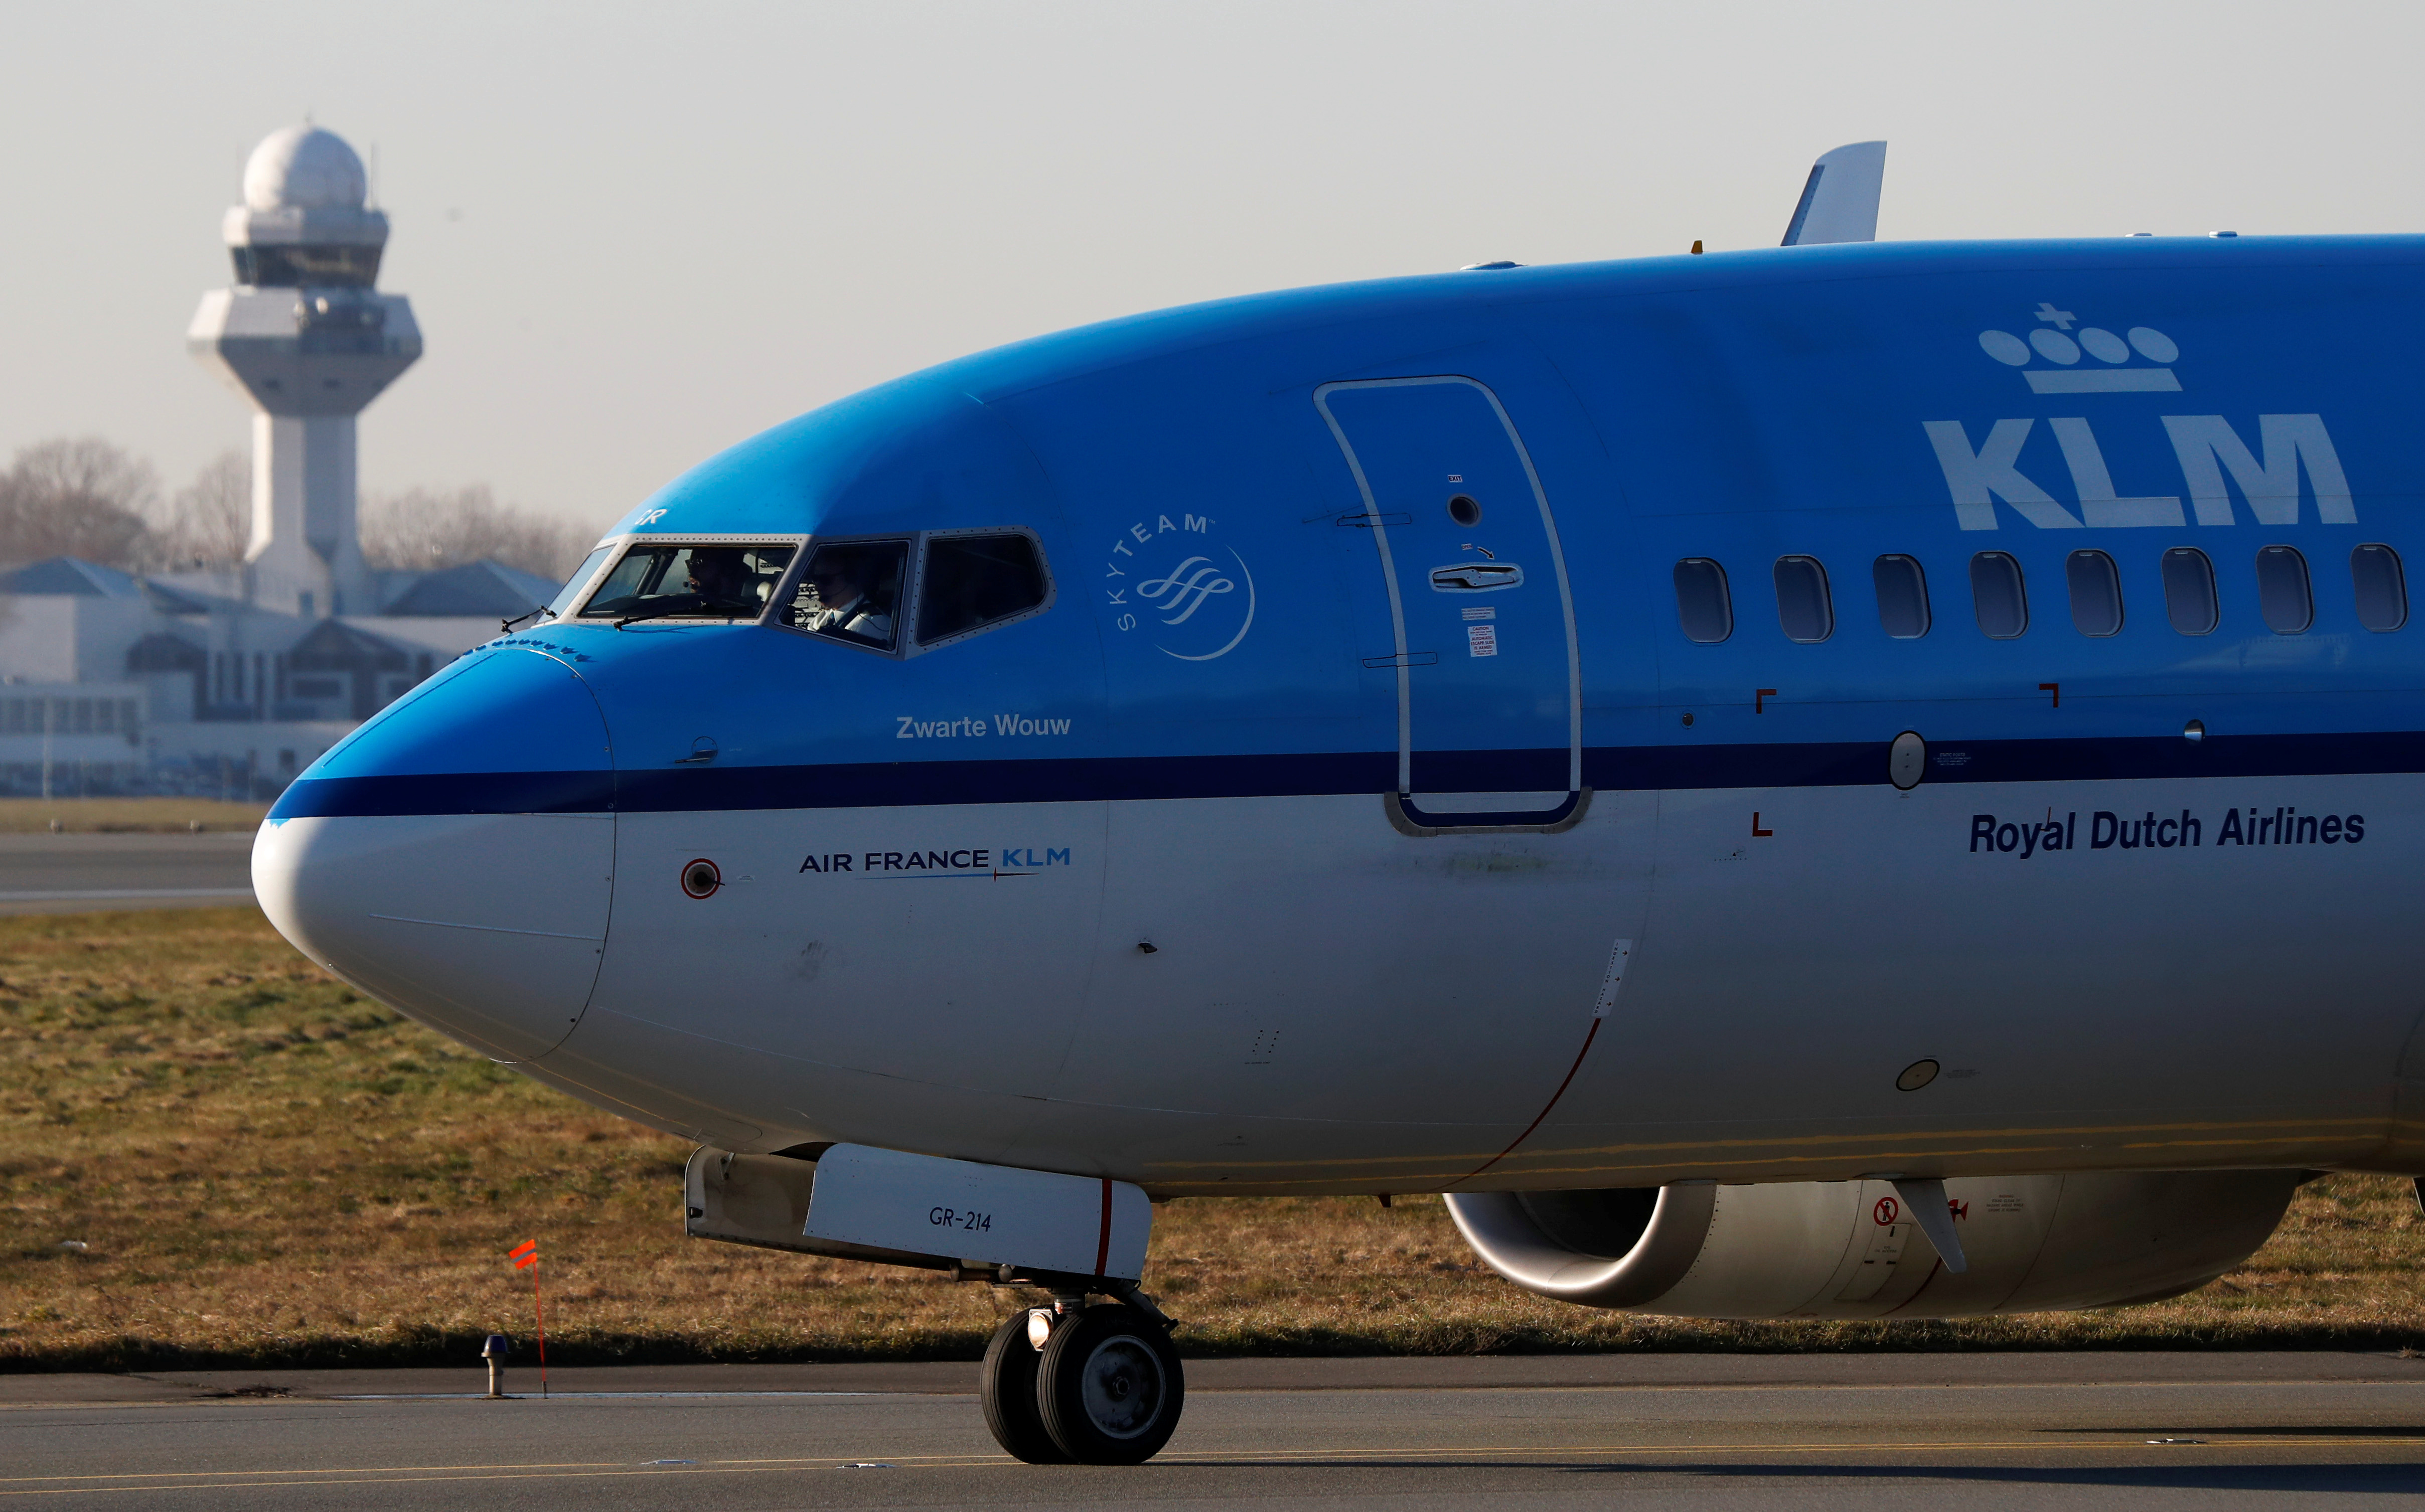 KLM Boeing 737 aircraft taxis to runway at the Chopin International Airport in Warsaw